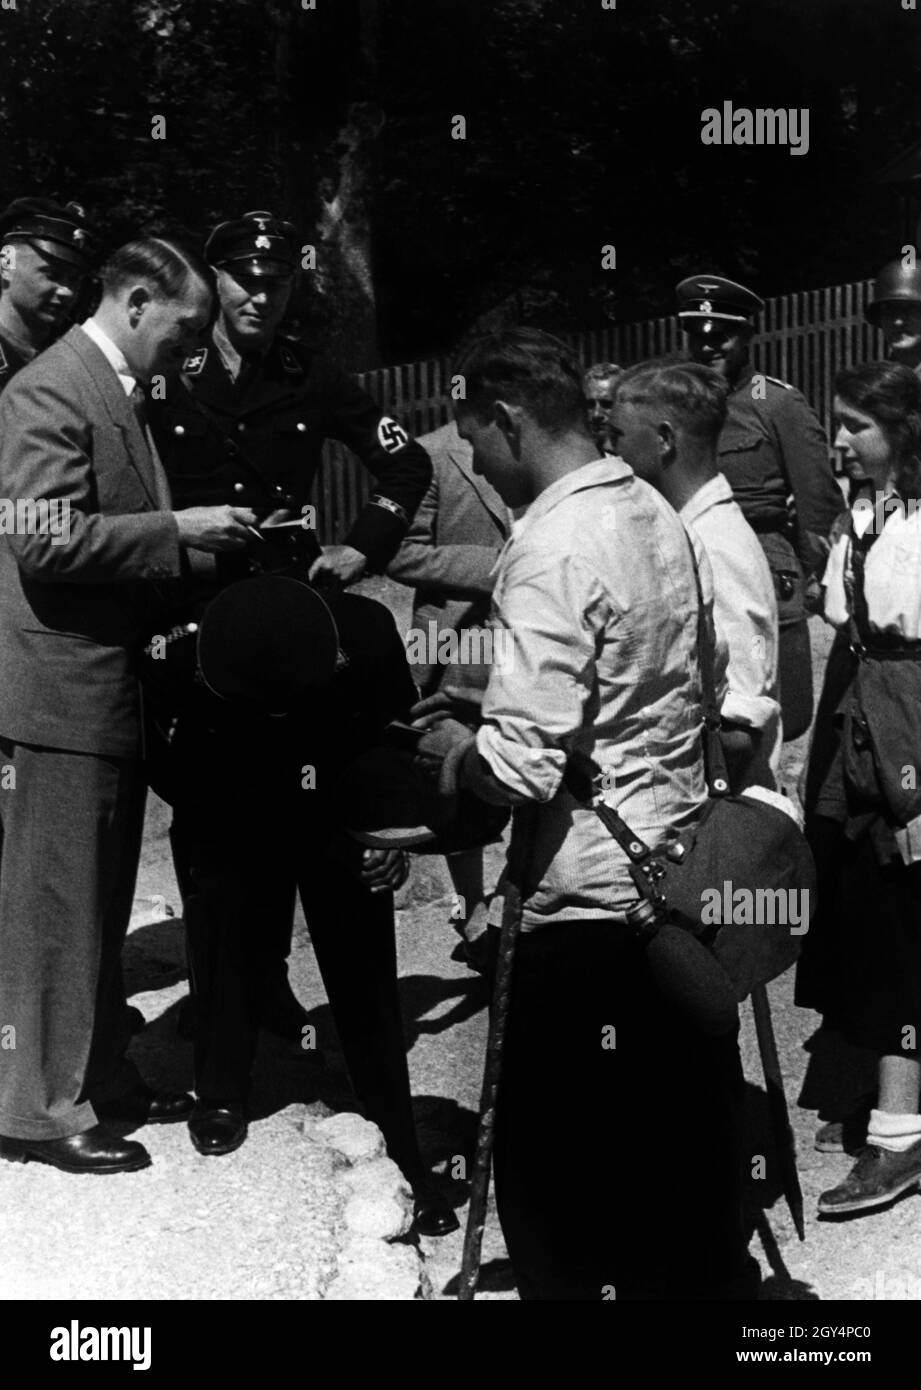 Hitler signs autographs during a holiday in Berchtesgaden. He is constantly accompanied by guards of the SS Führerbegleitkommando. [automated translation] Stock Photo